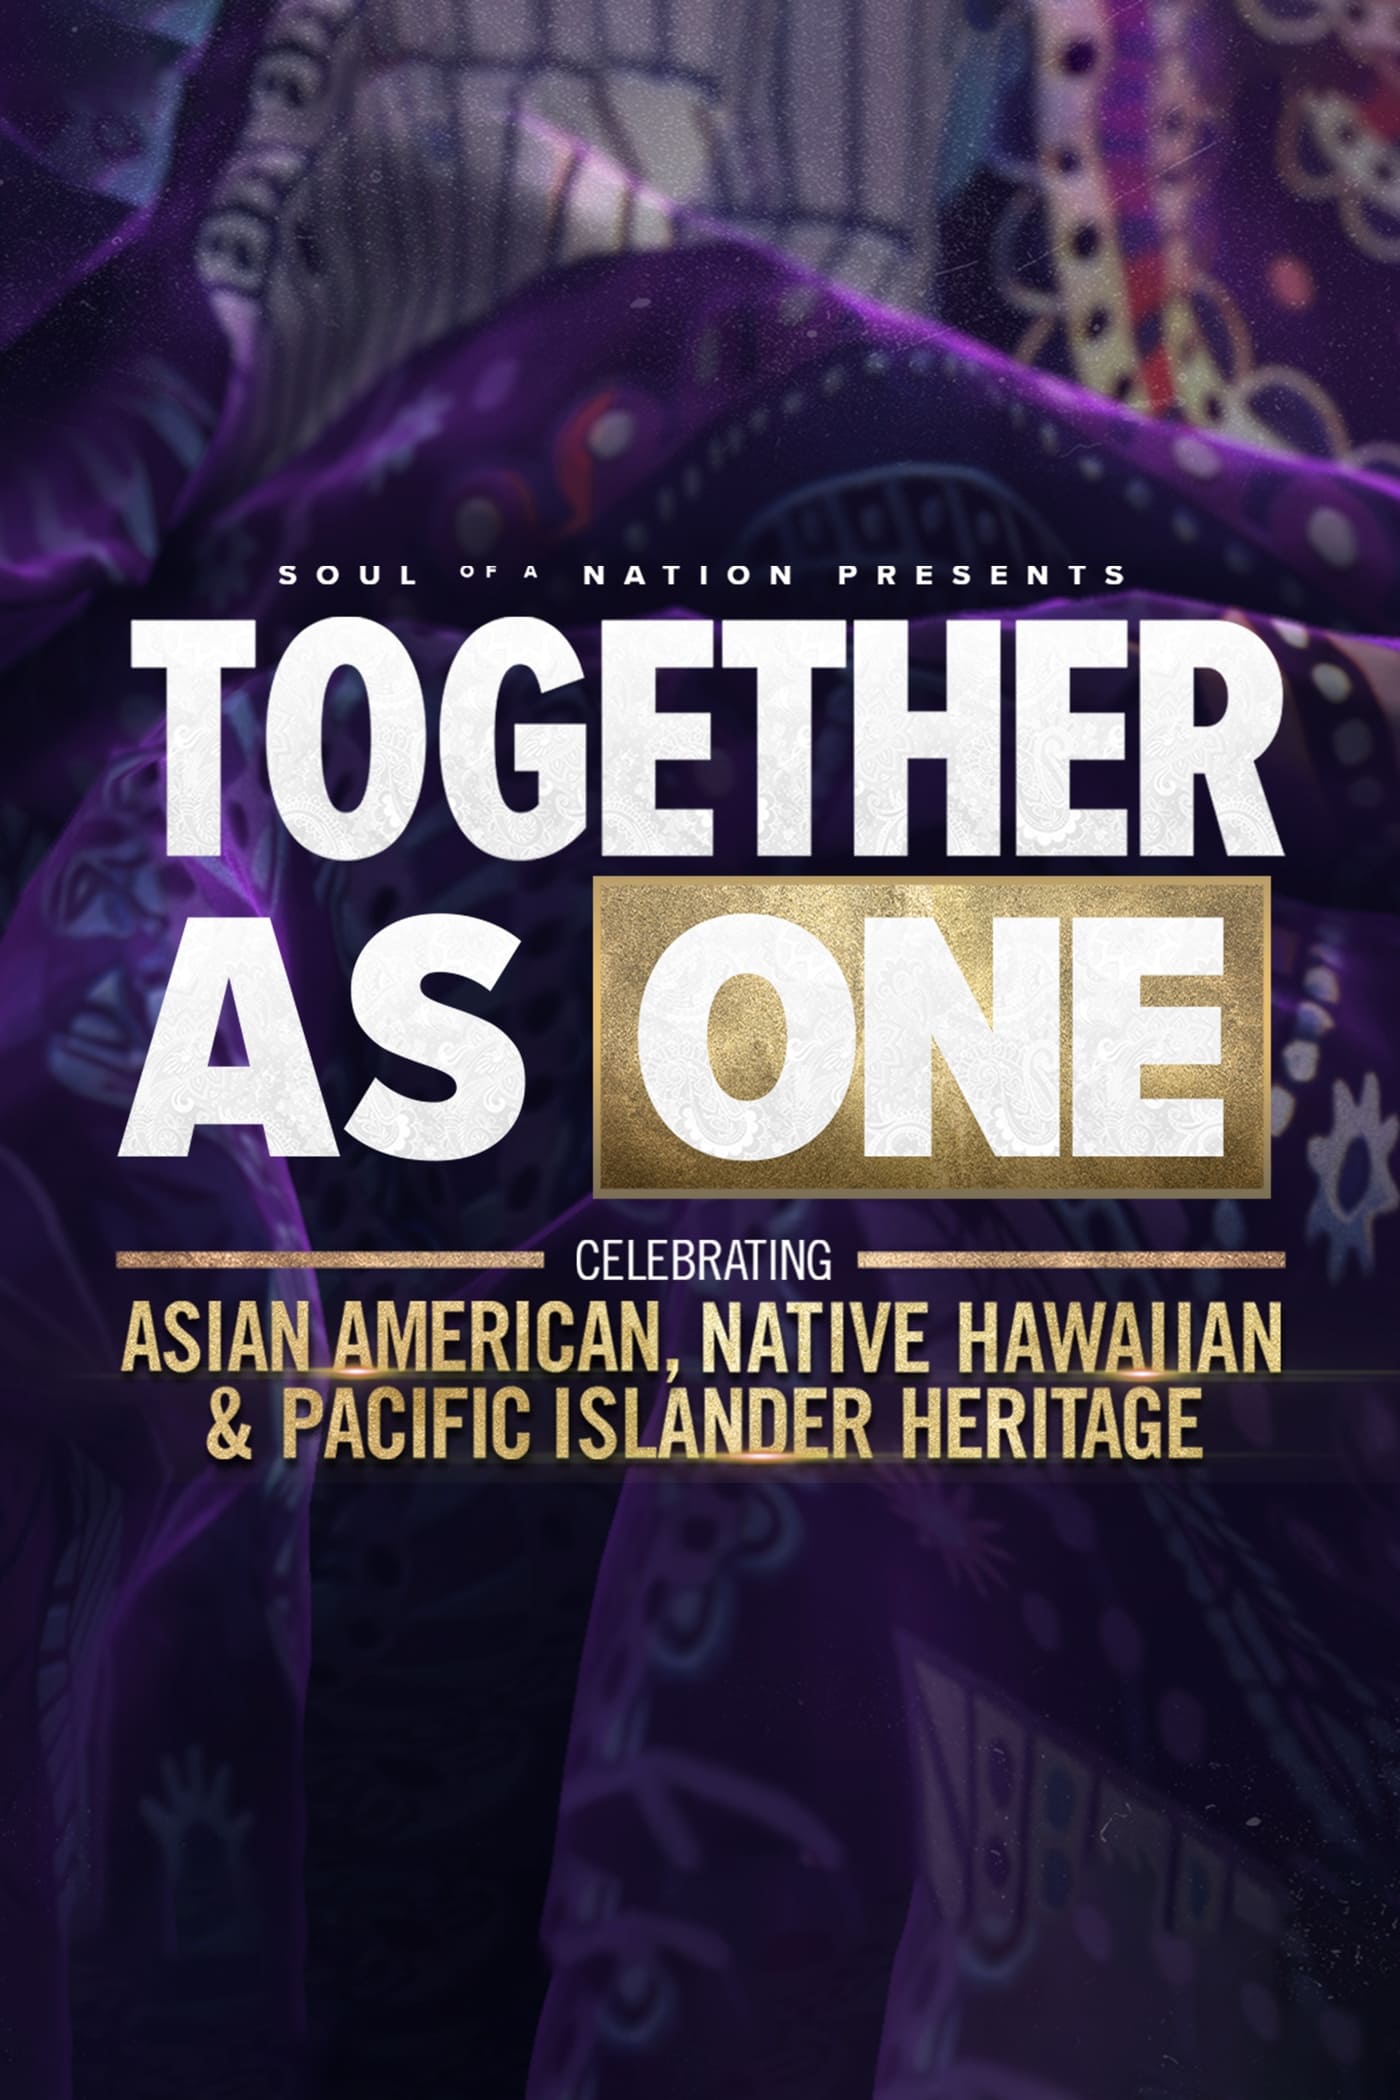 Soul of a Nation Presents: Together As One: Celebrating Asian American, Native Hawaiian and Pacific Islander Heritage